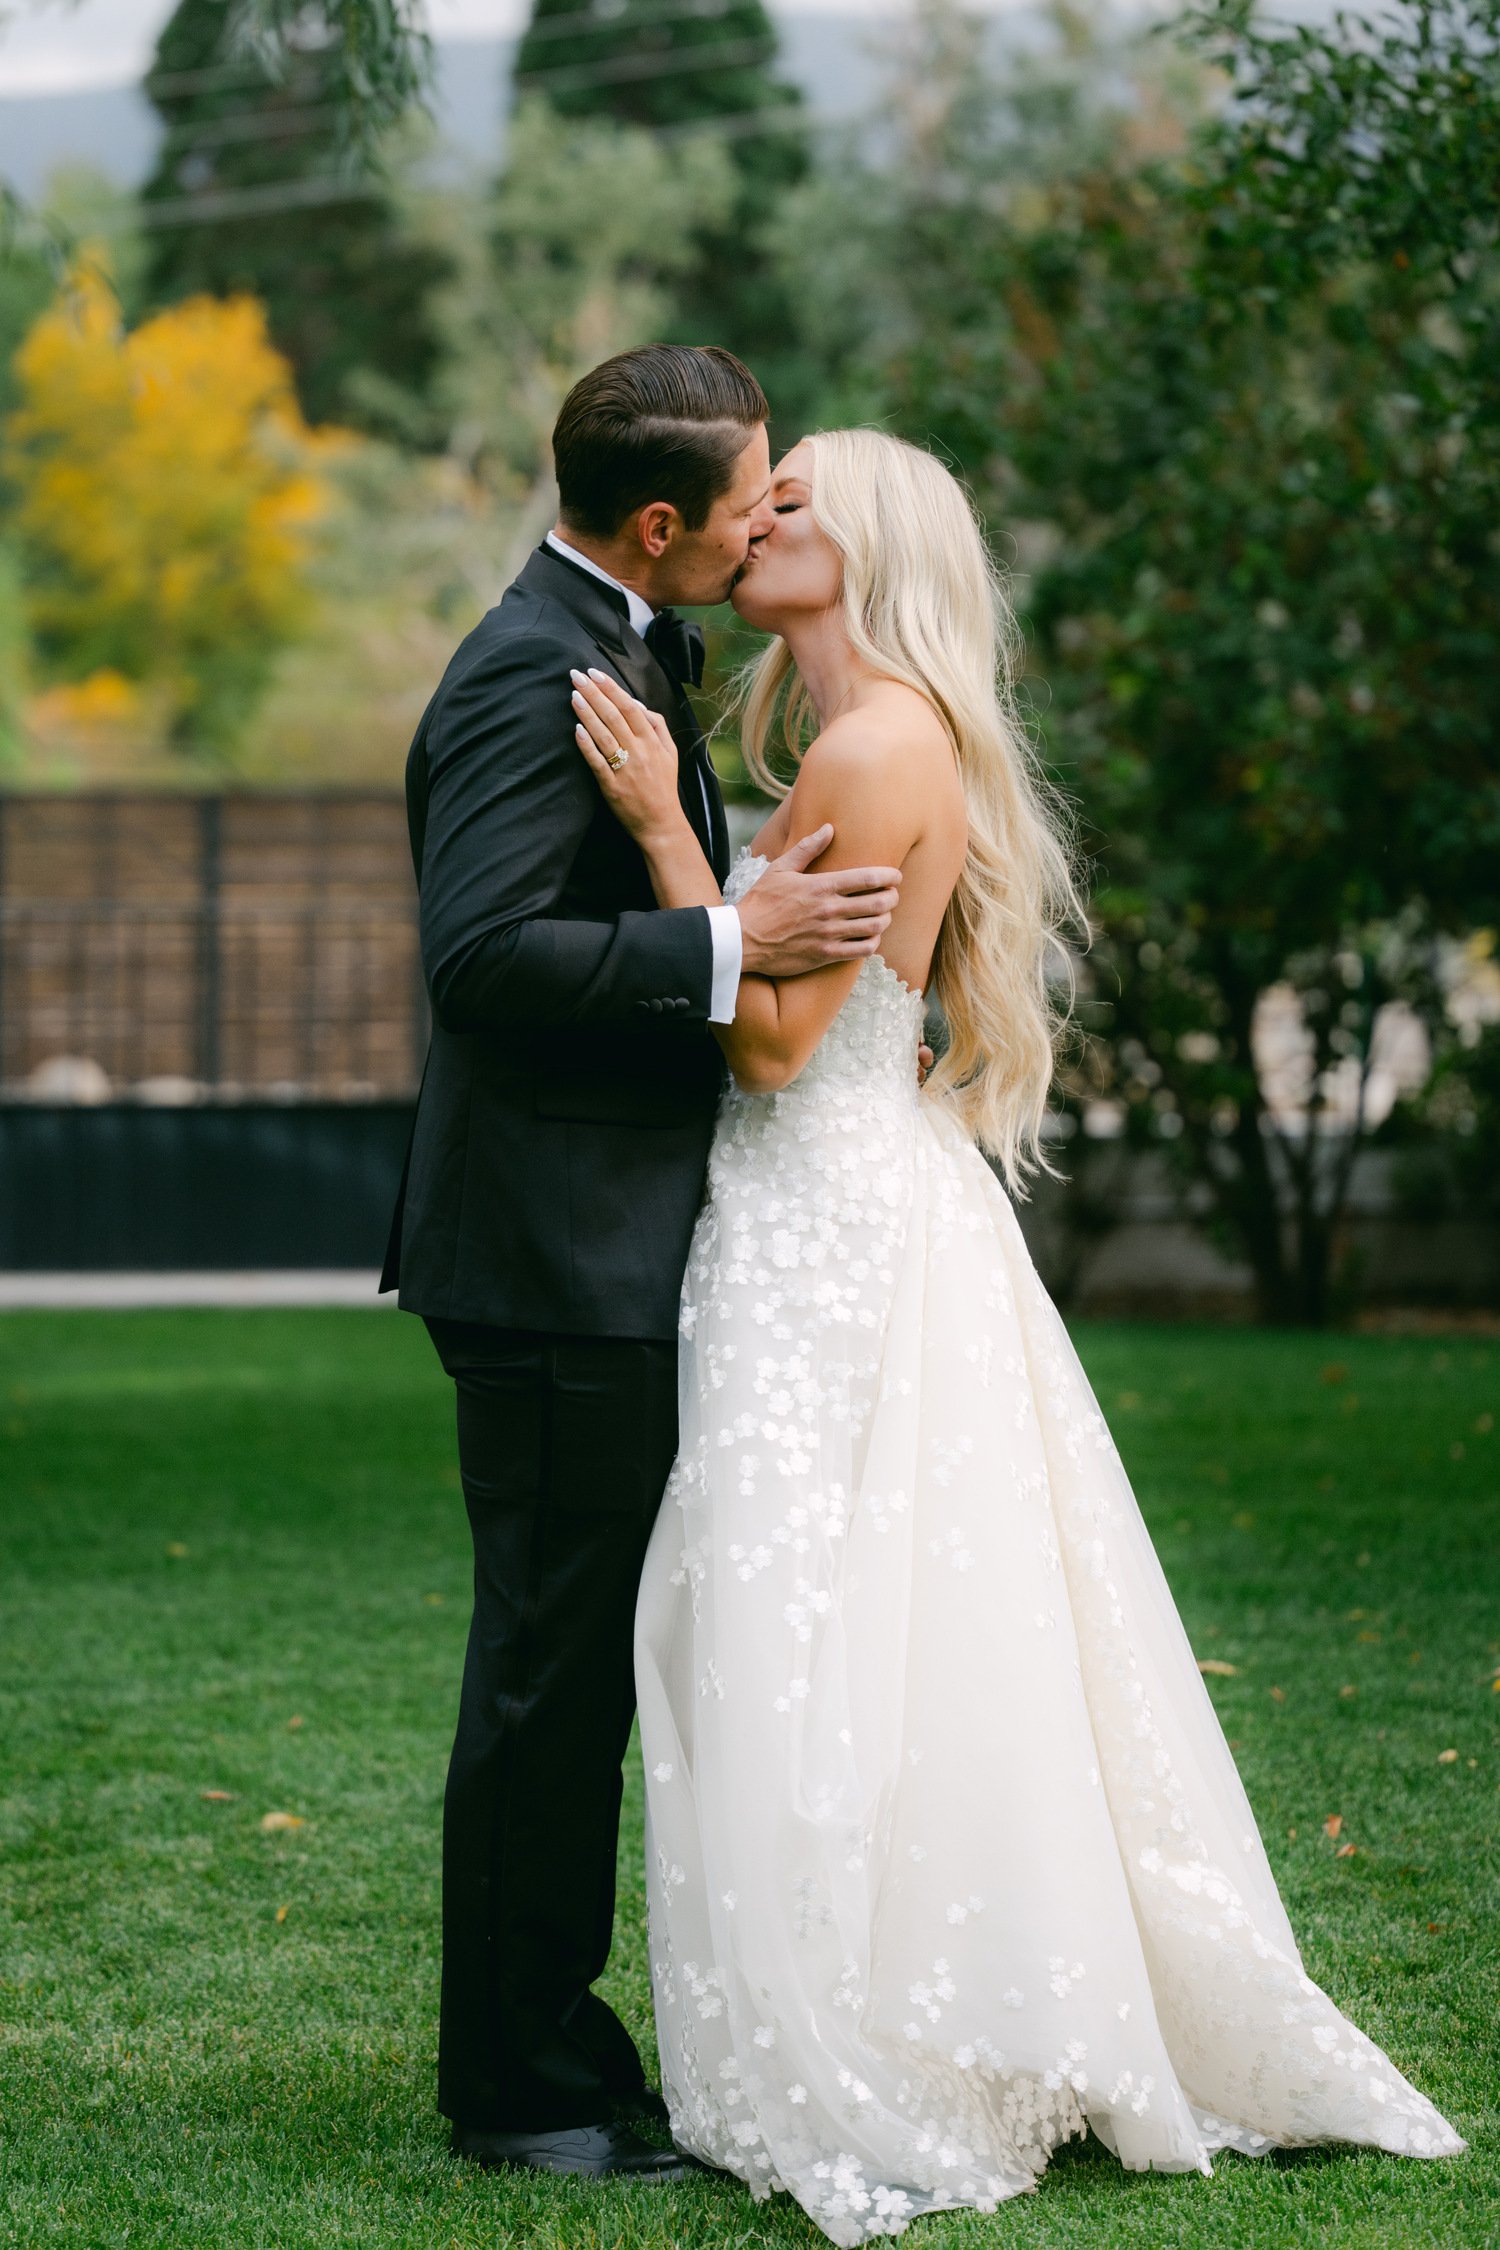 Elm Estate Wedding photos, photo of the bride and groom kissing on outdoors with trees in the background